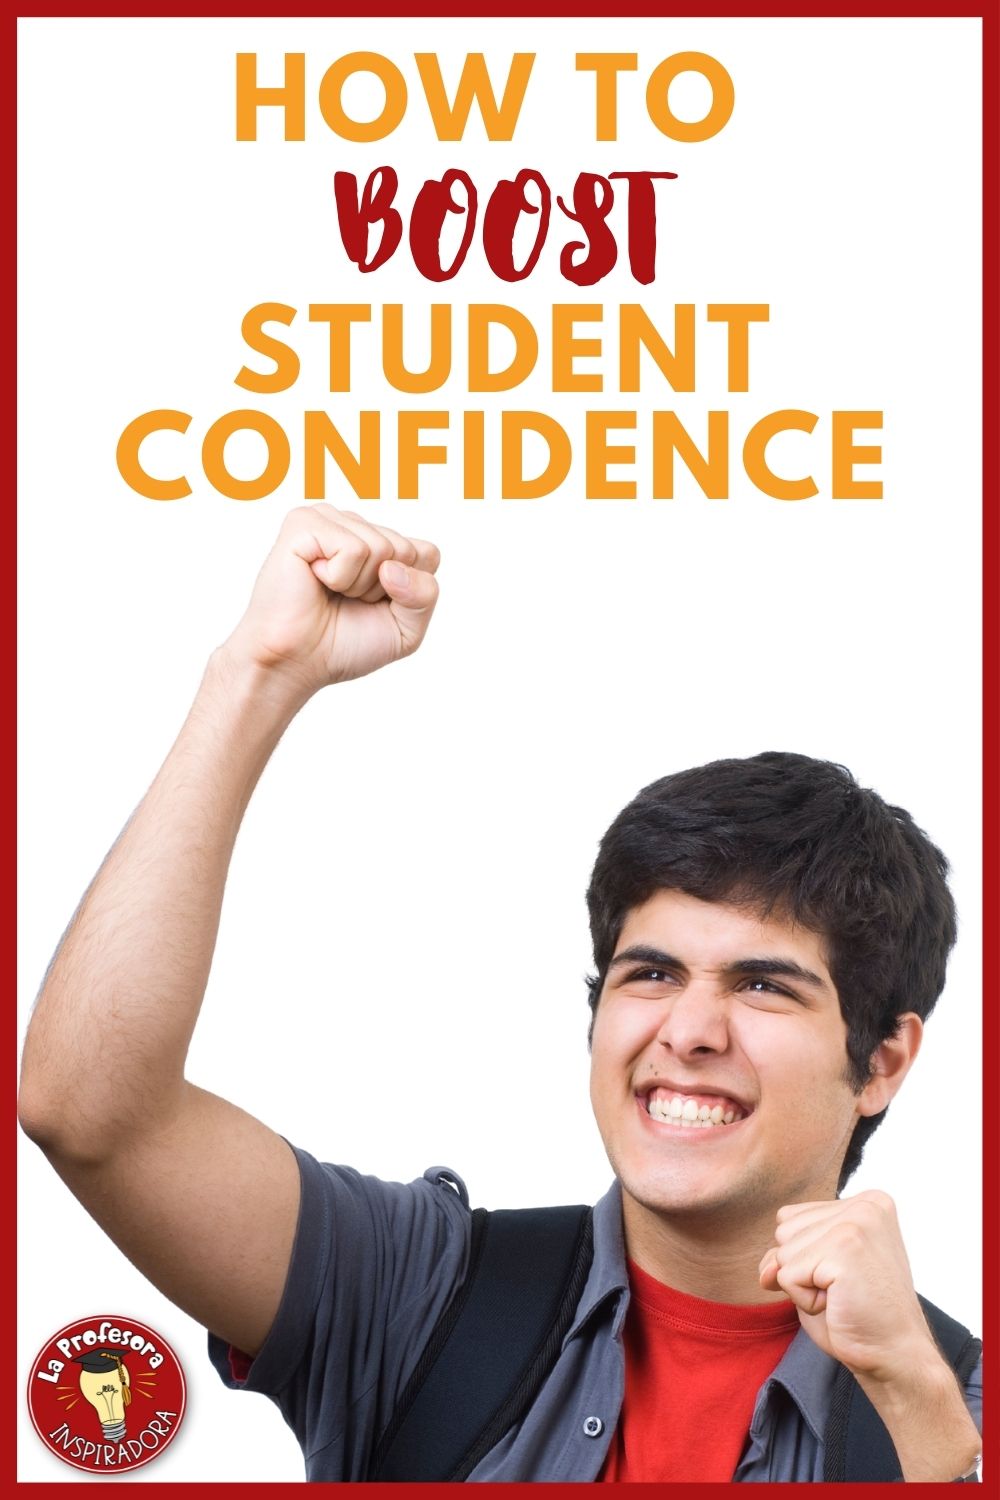 Featured image for blog post on boosting student confidence